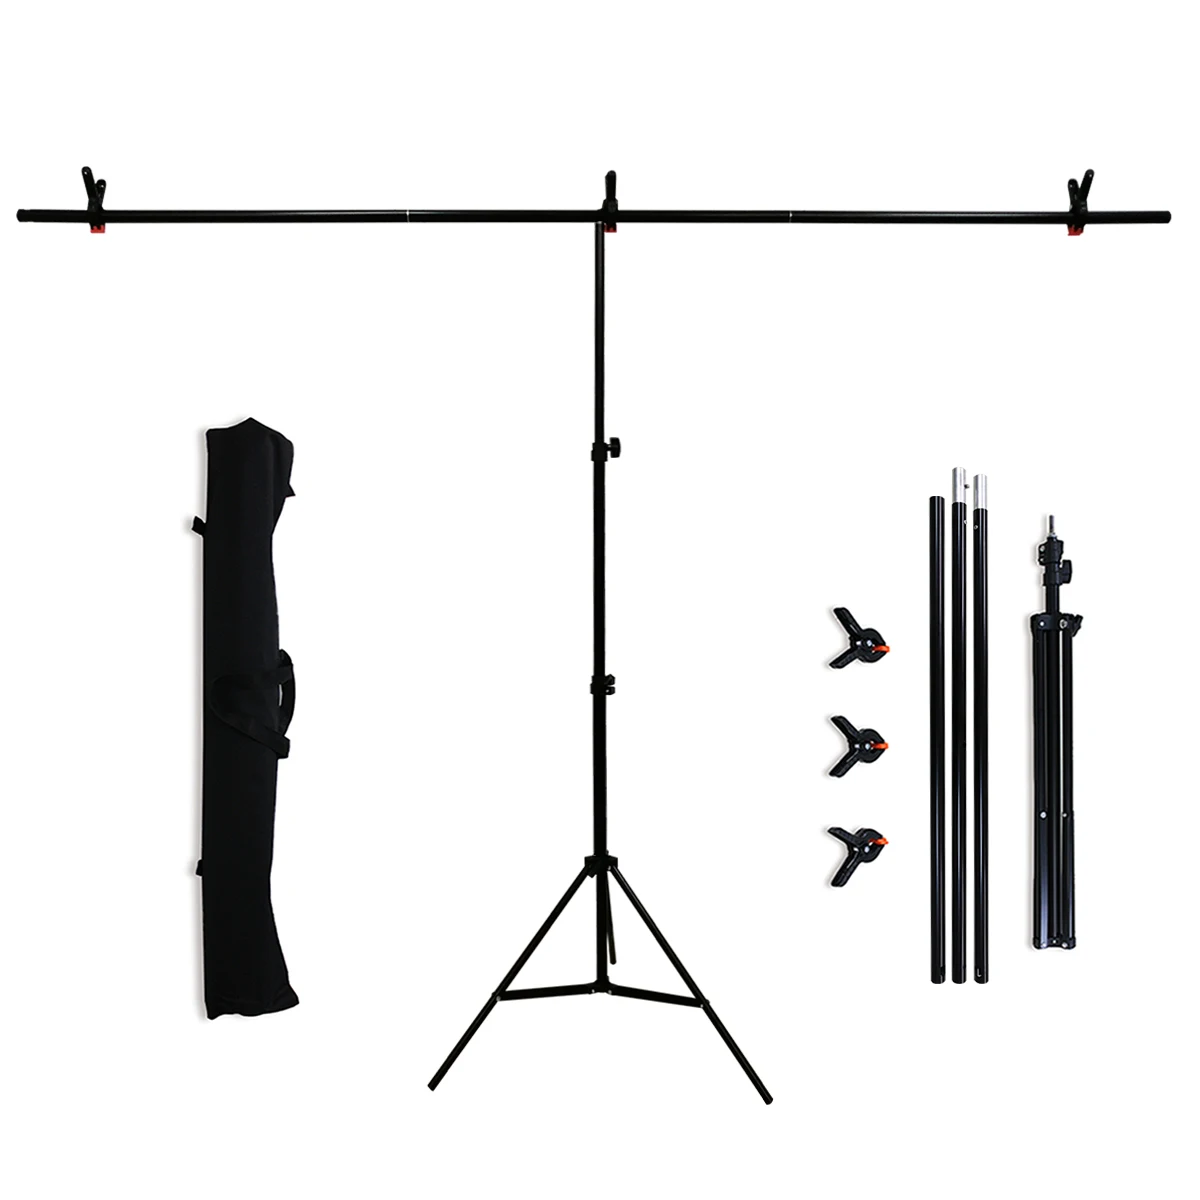 Photography background T-Shape Background Stand Backdrop Screen Support System Green Video Chroma Key With Carry Bag, For Studio enlarge